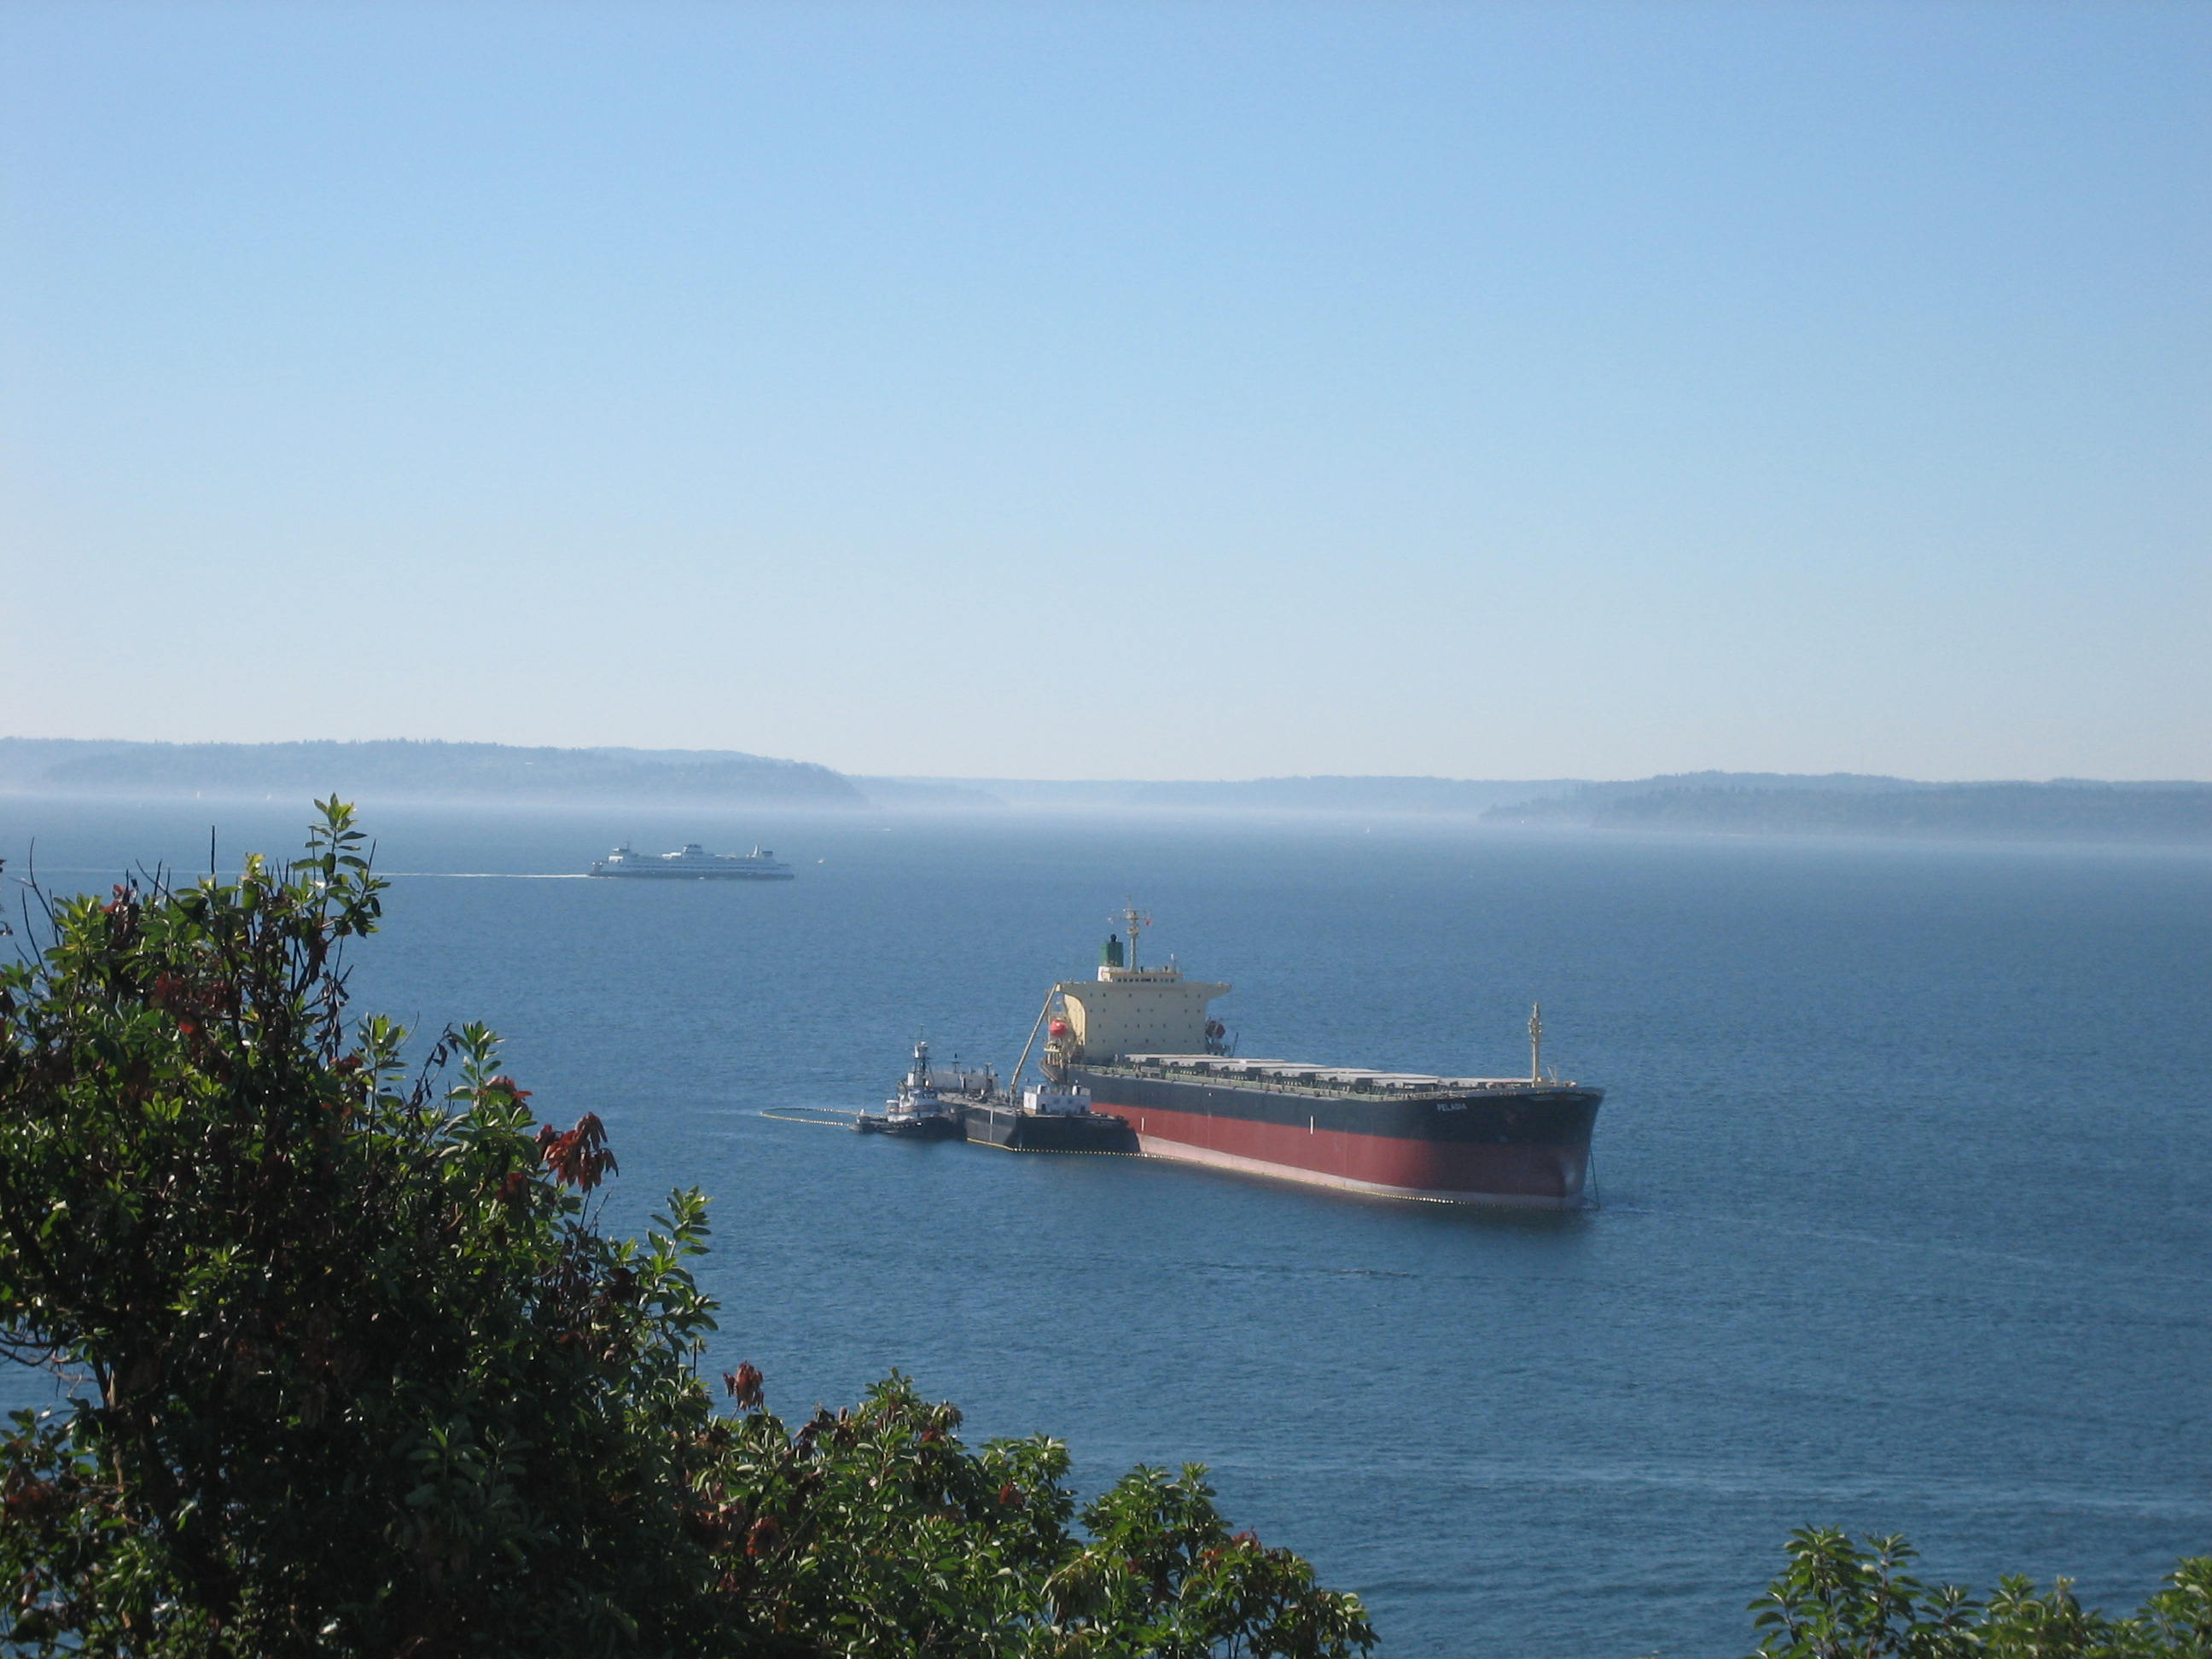 Vessels and state ferry in Puget Sound.